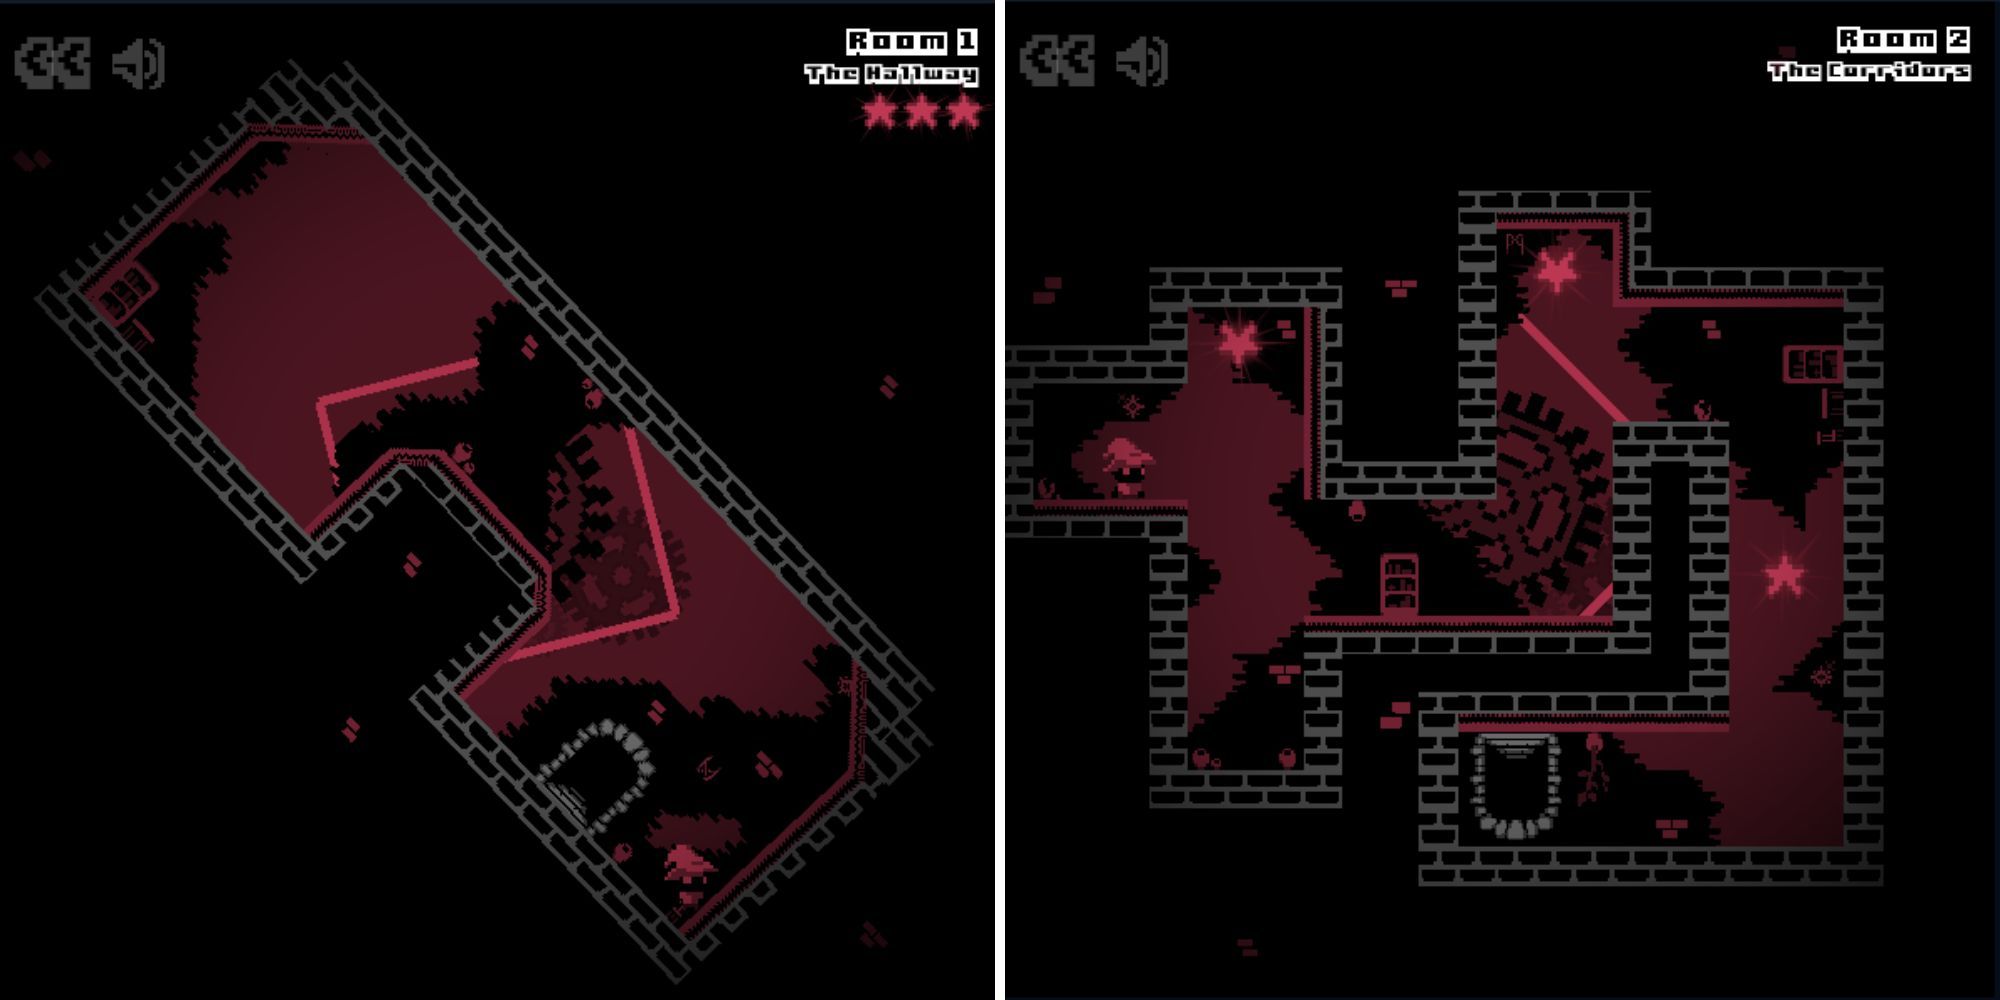 A split image of largely black and red, 8-bit levels showing an exit door and red collectible stars.